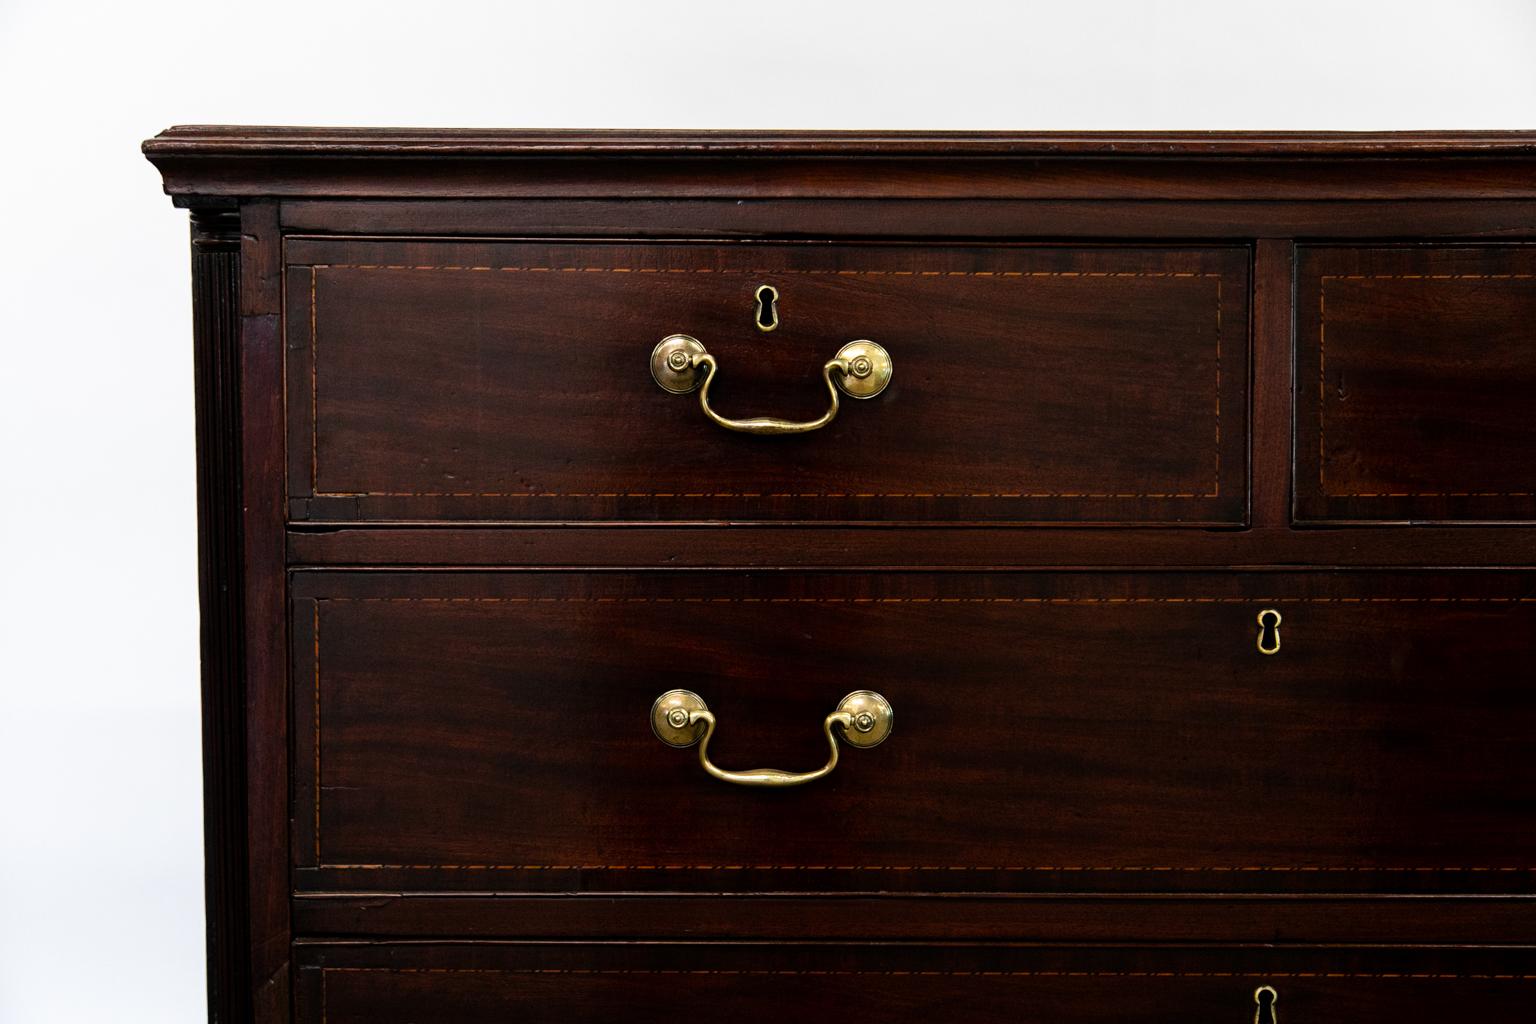 The drawers of this chest are crossbanded with mahogany and inlaid with boxwood and ebony. The corners have a fluted corner column and the base has the original ogee feet.